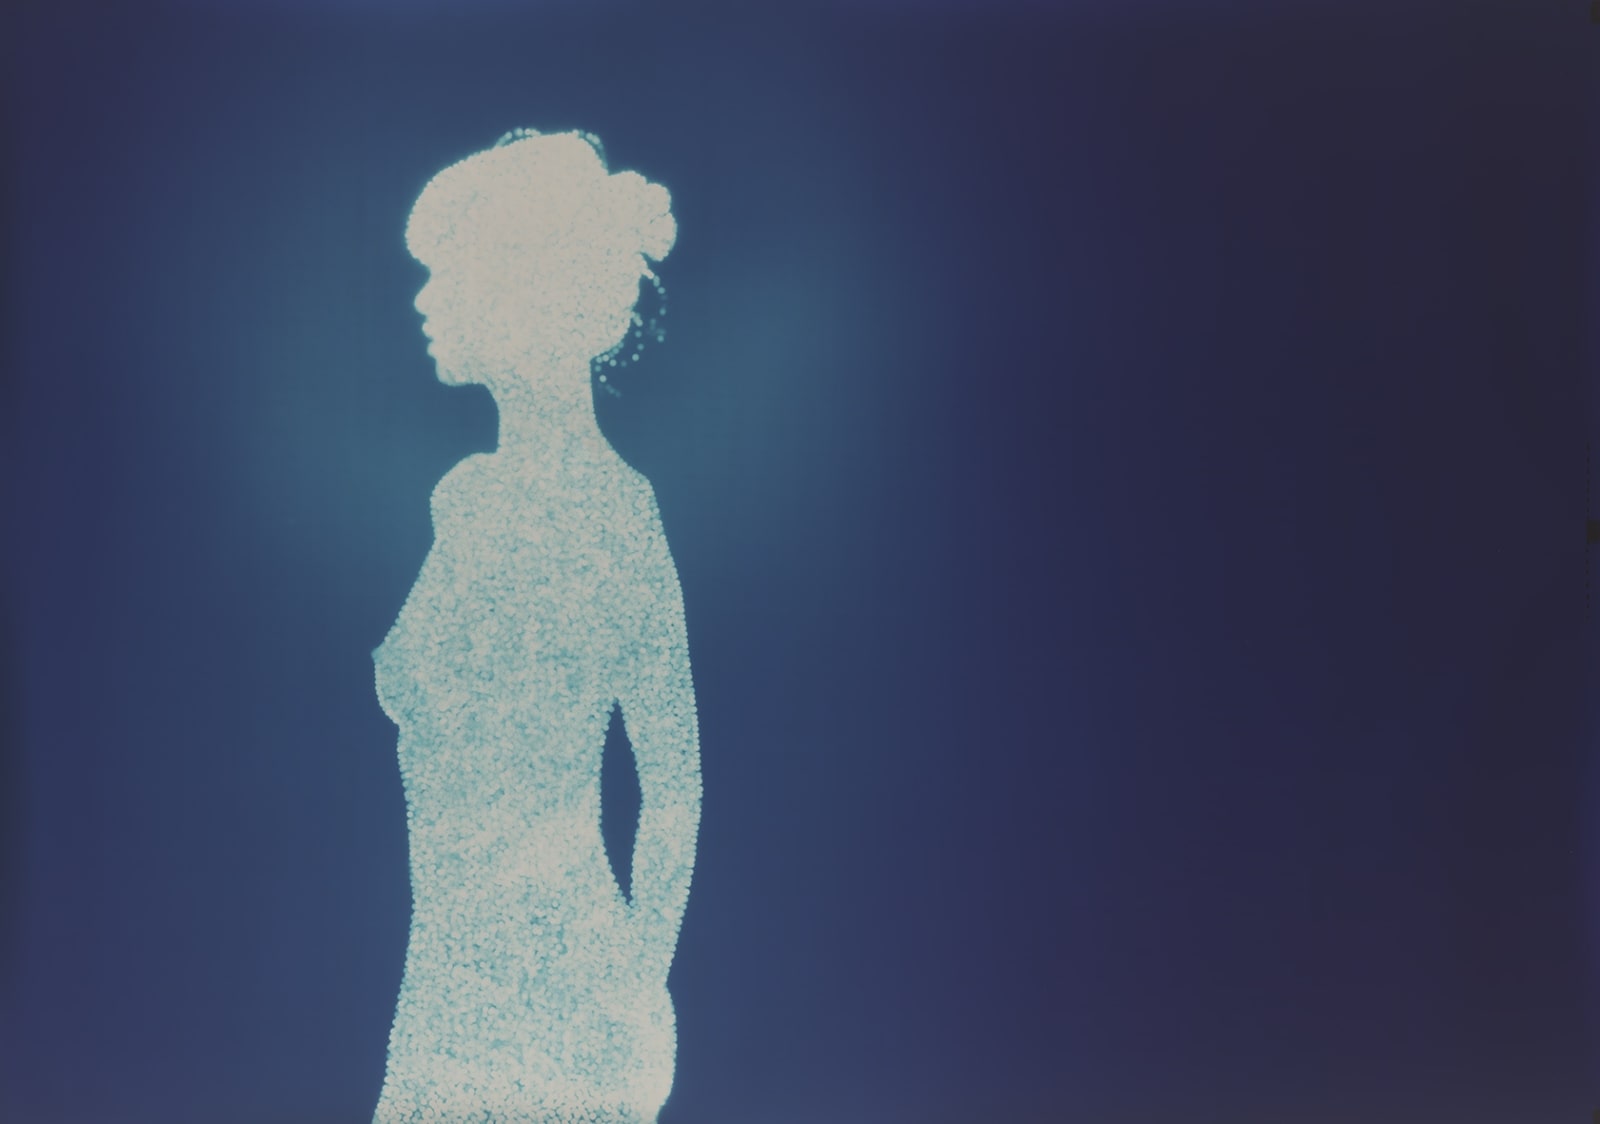 Christopher Bucklow Tetrarch, 1.28 pm, 24th June silhouette of nude woman in light coming through blue background